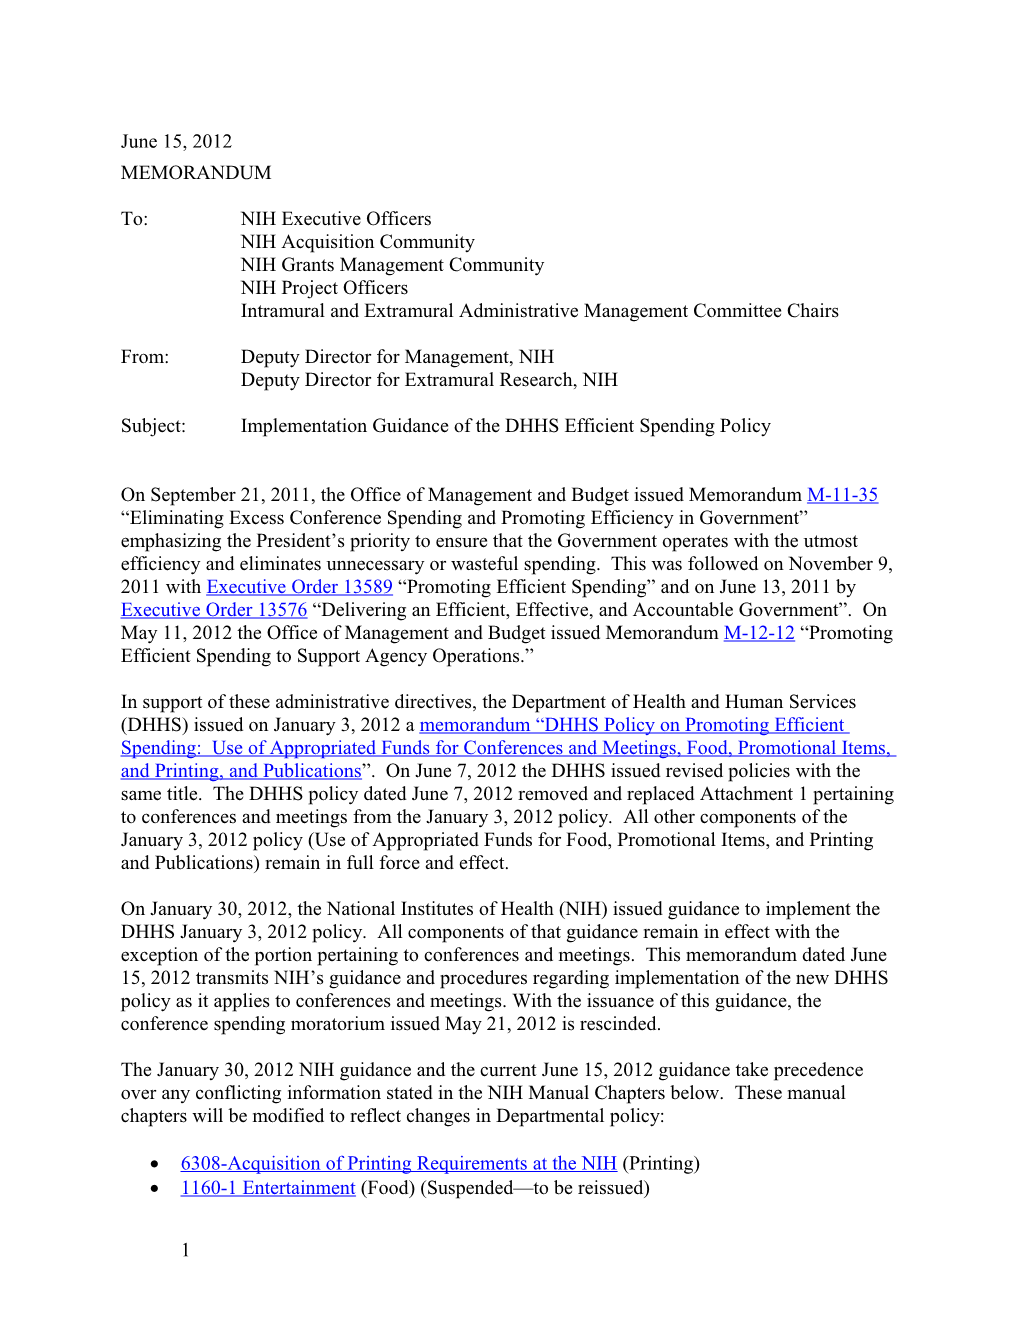 NIH Implemtation Guidance of the DHHS Efficient Spending Policy 6/15/12